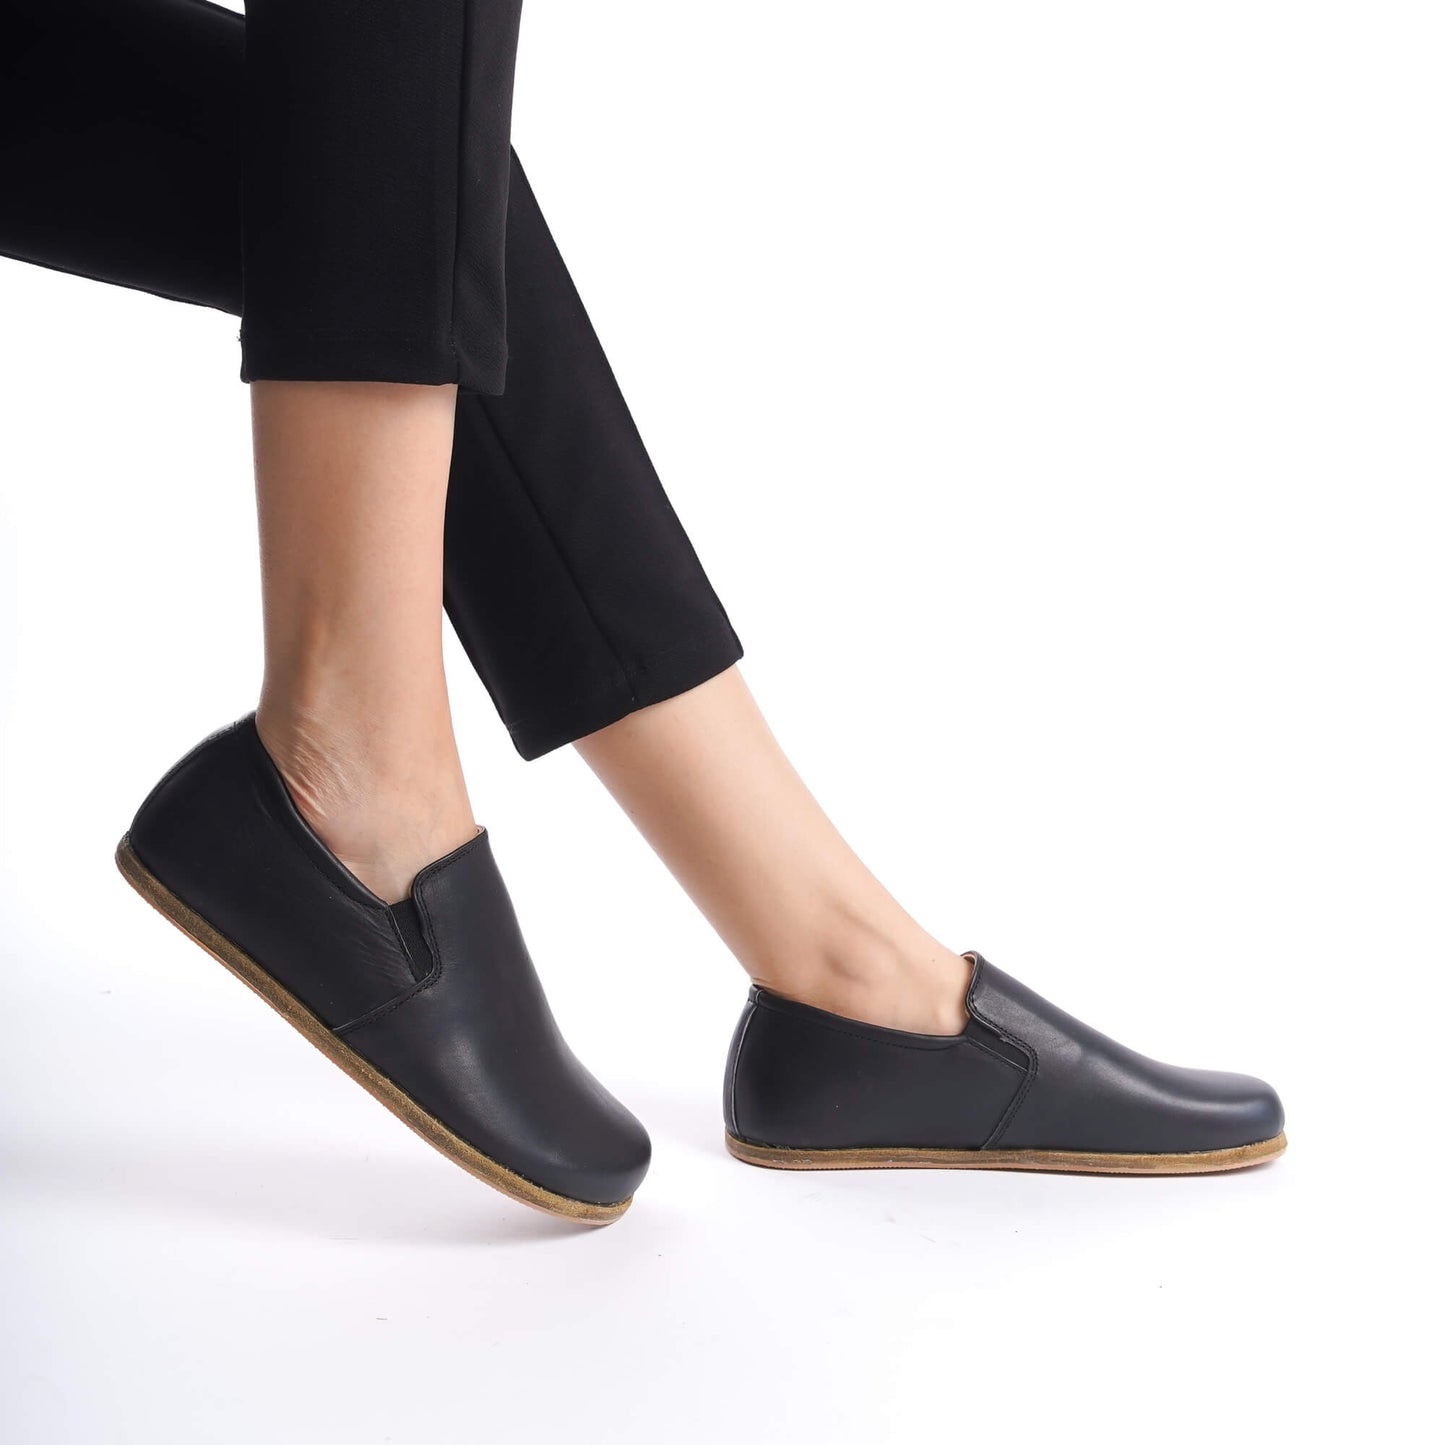 Ionia Black Leather Loafers - Side View in Motion